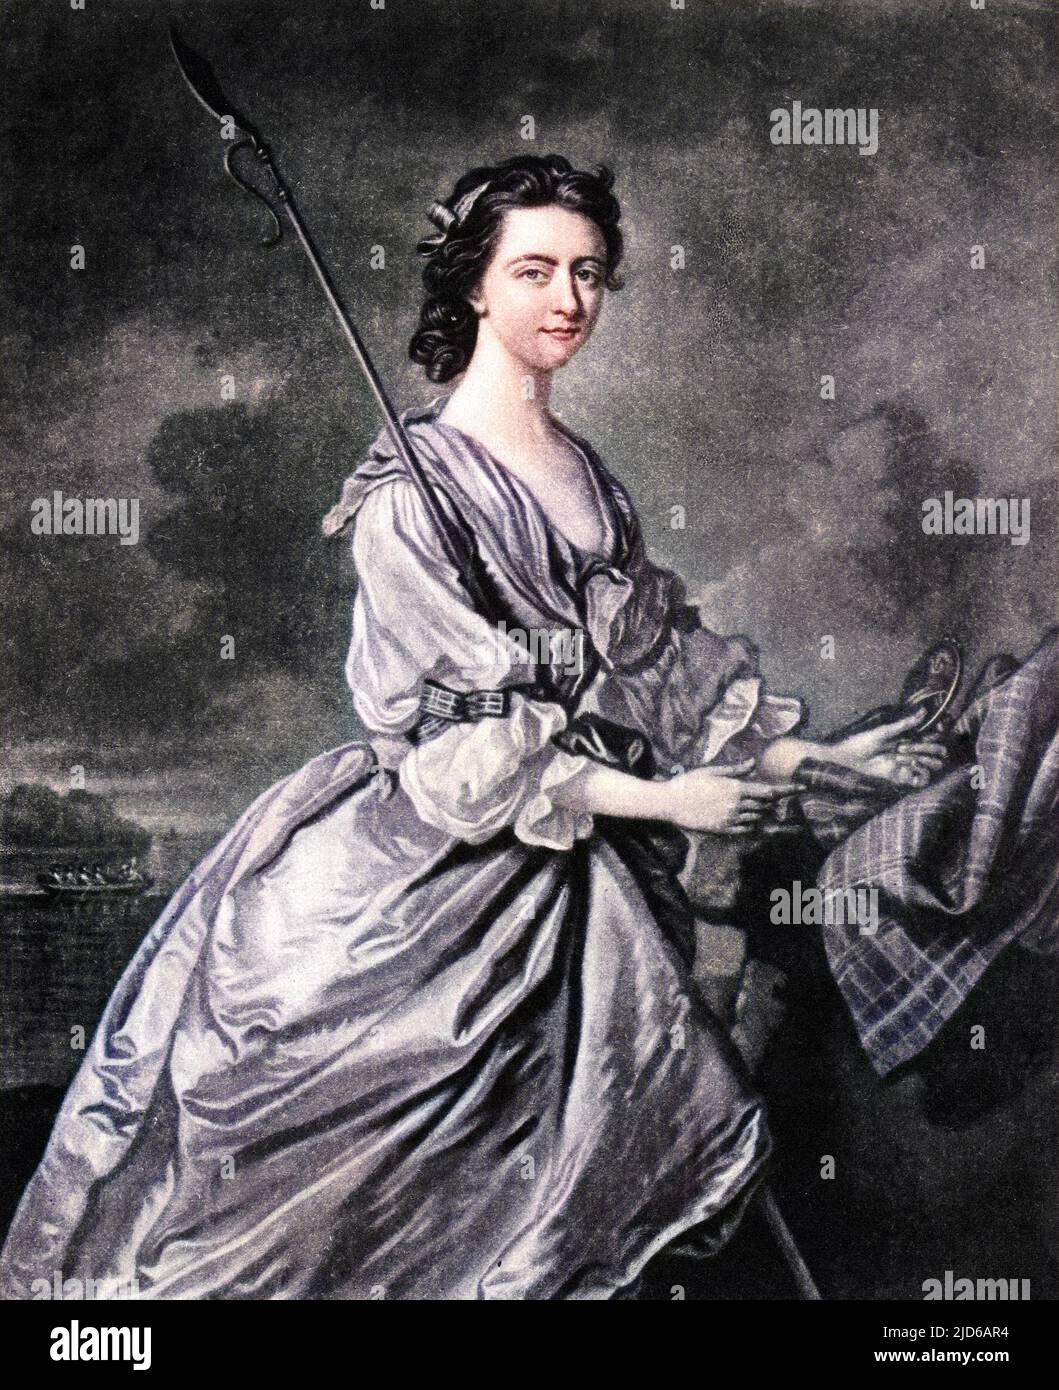 FLORA MACDONALD Patriotic Scottish female who helped Charles Edward Stuart to escape to France. Colourised version of : 10163951       Date: 1722 - 1790 Stock Photo